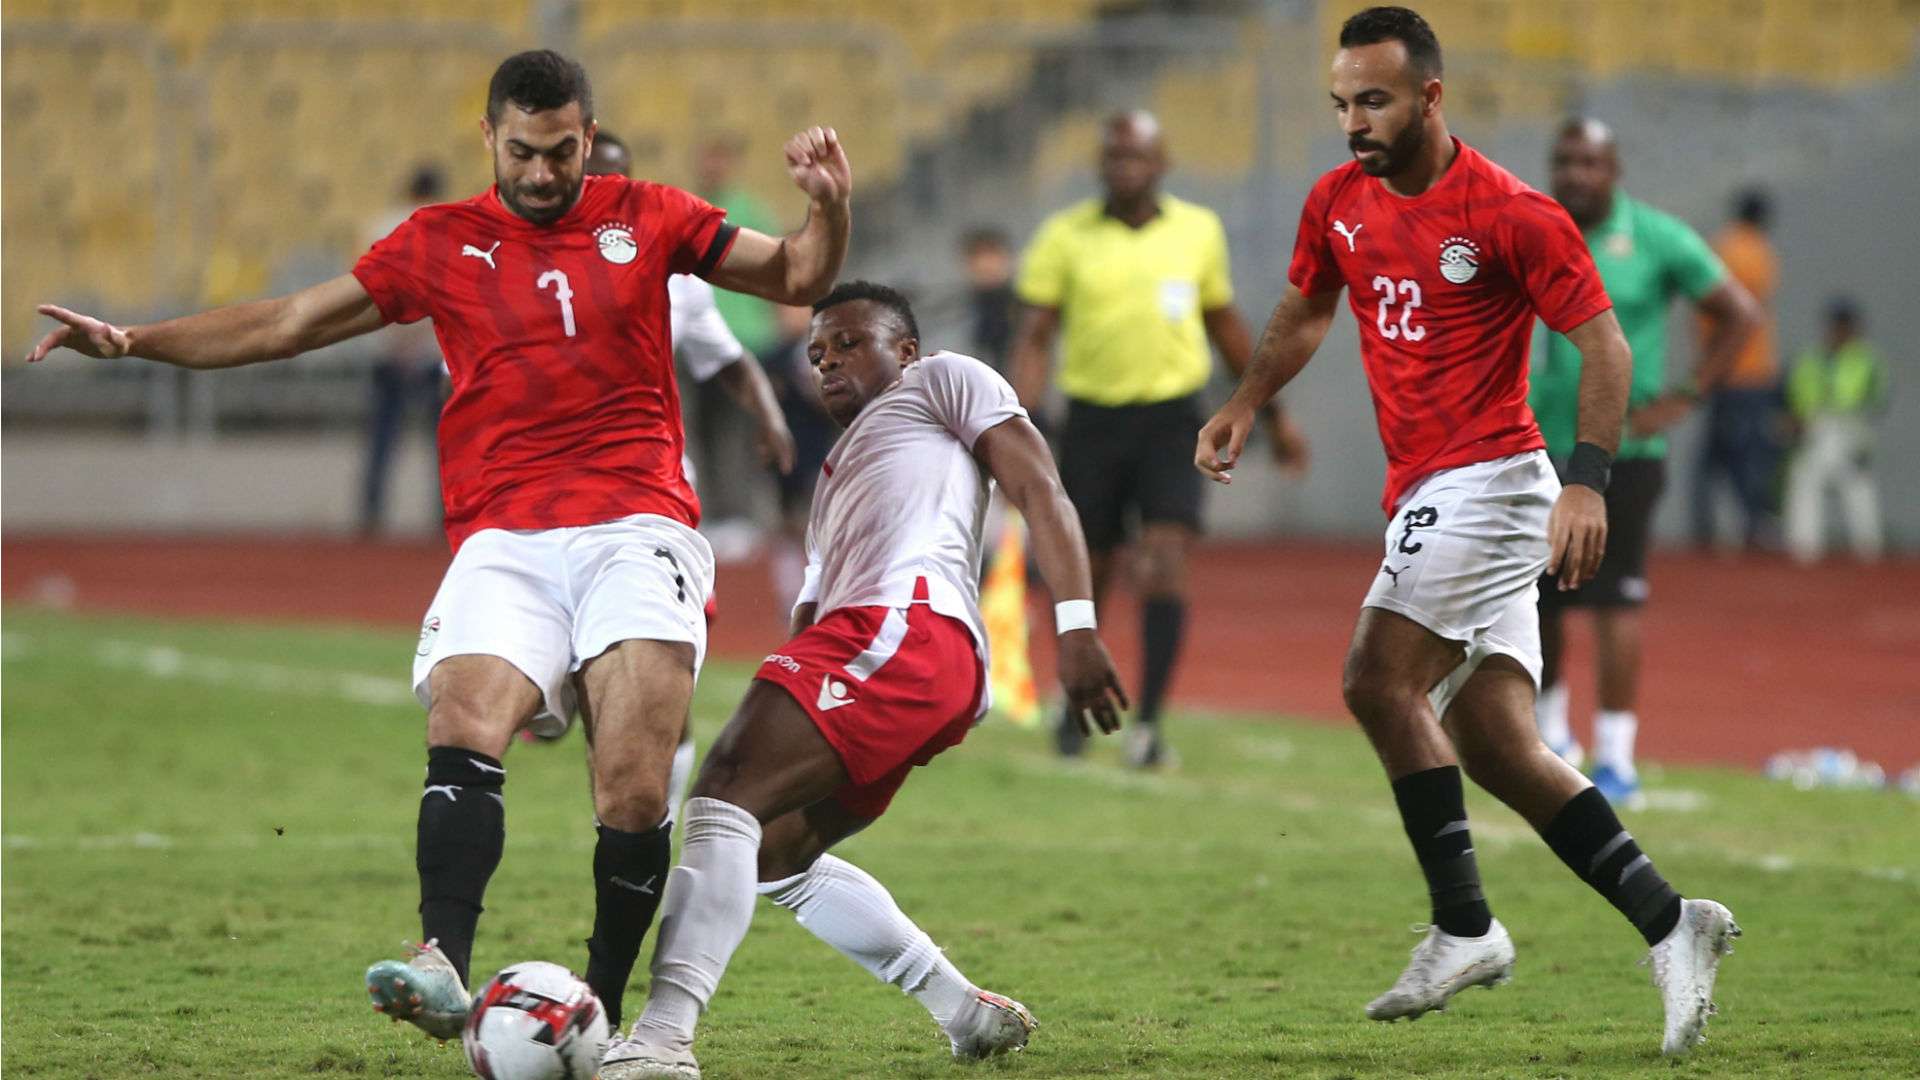 Egypt's Ahmed Fathi (L) in action against Kenya and Harambee Stars player Ayub Timbe.